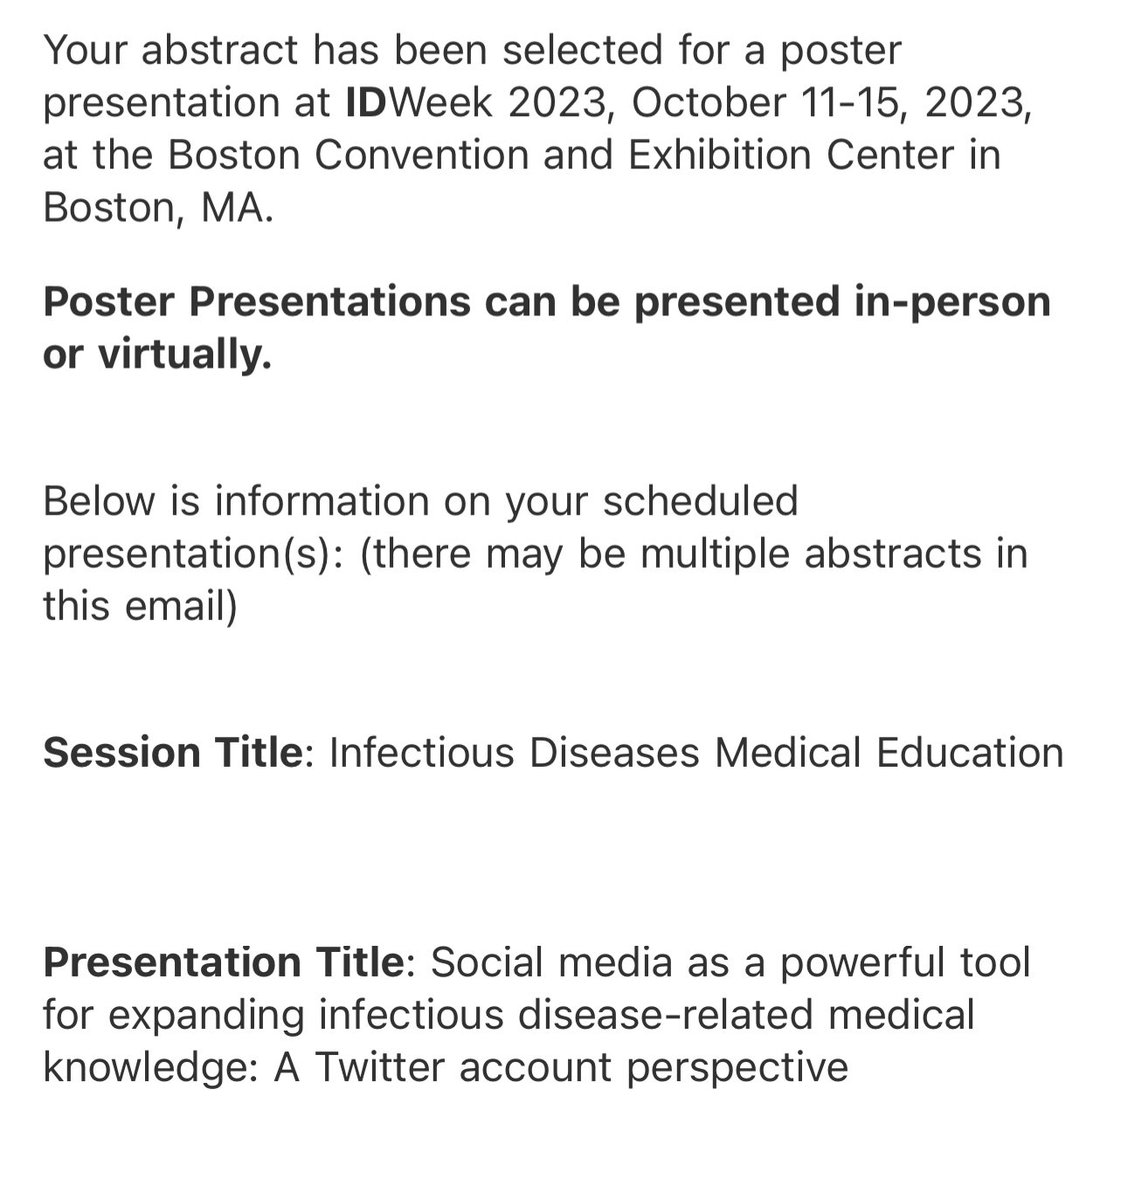 We are going to Boston!  #IDweek2023 🙌 #IDtwitter